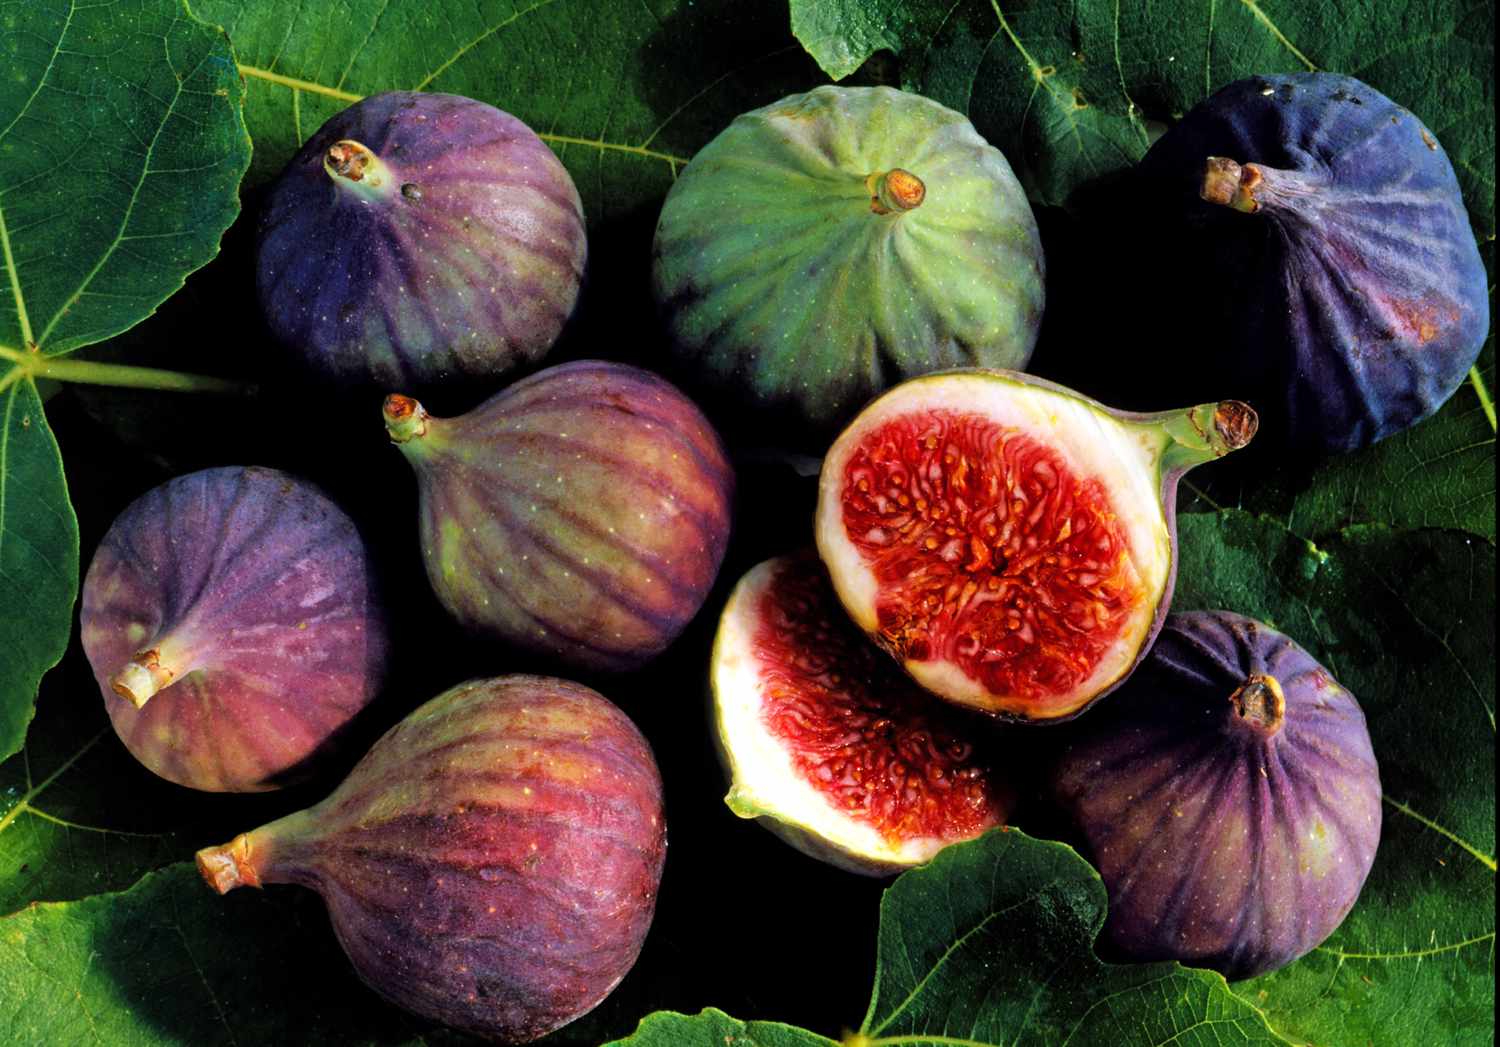 Figs Have 8 Health Benefits For Men.